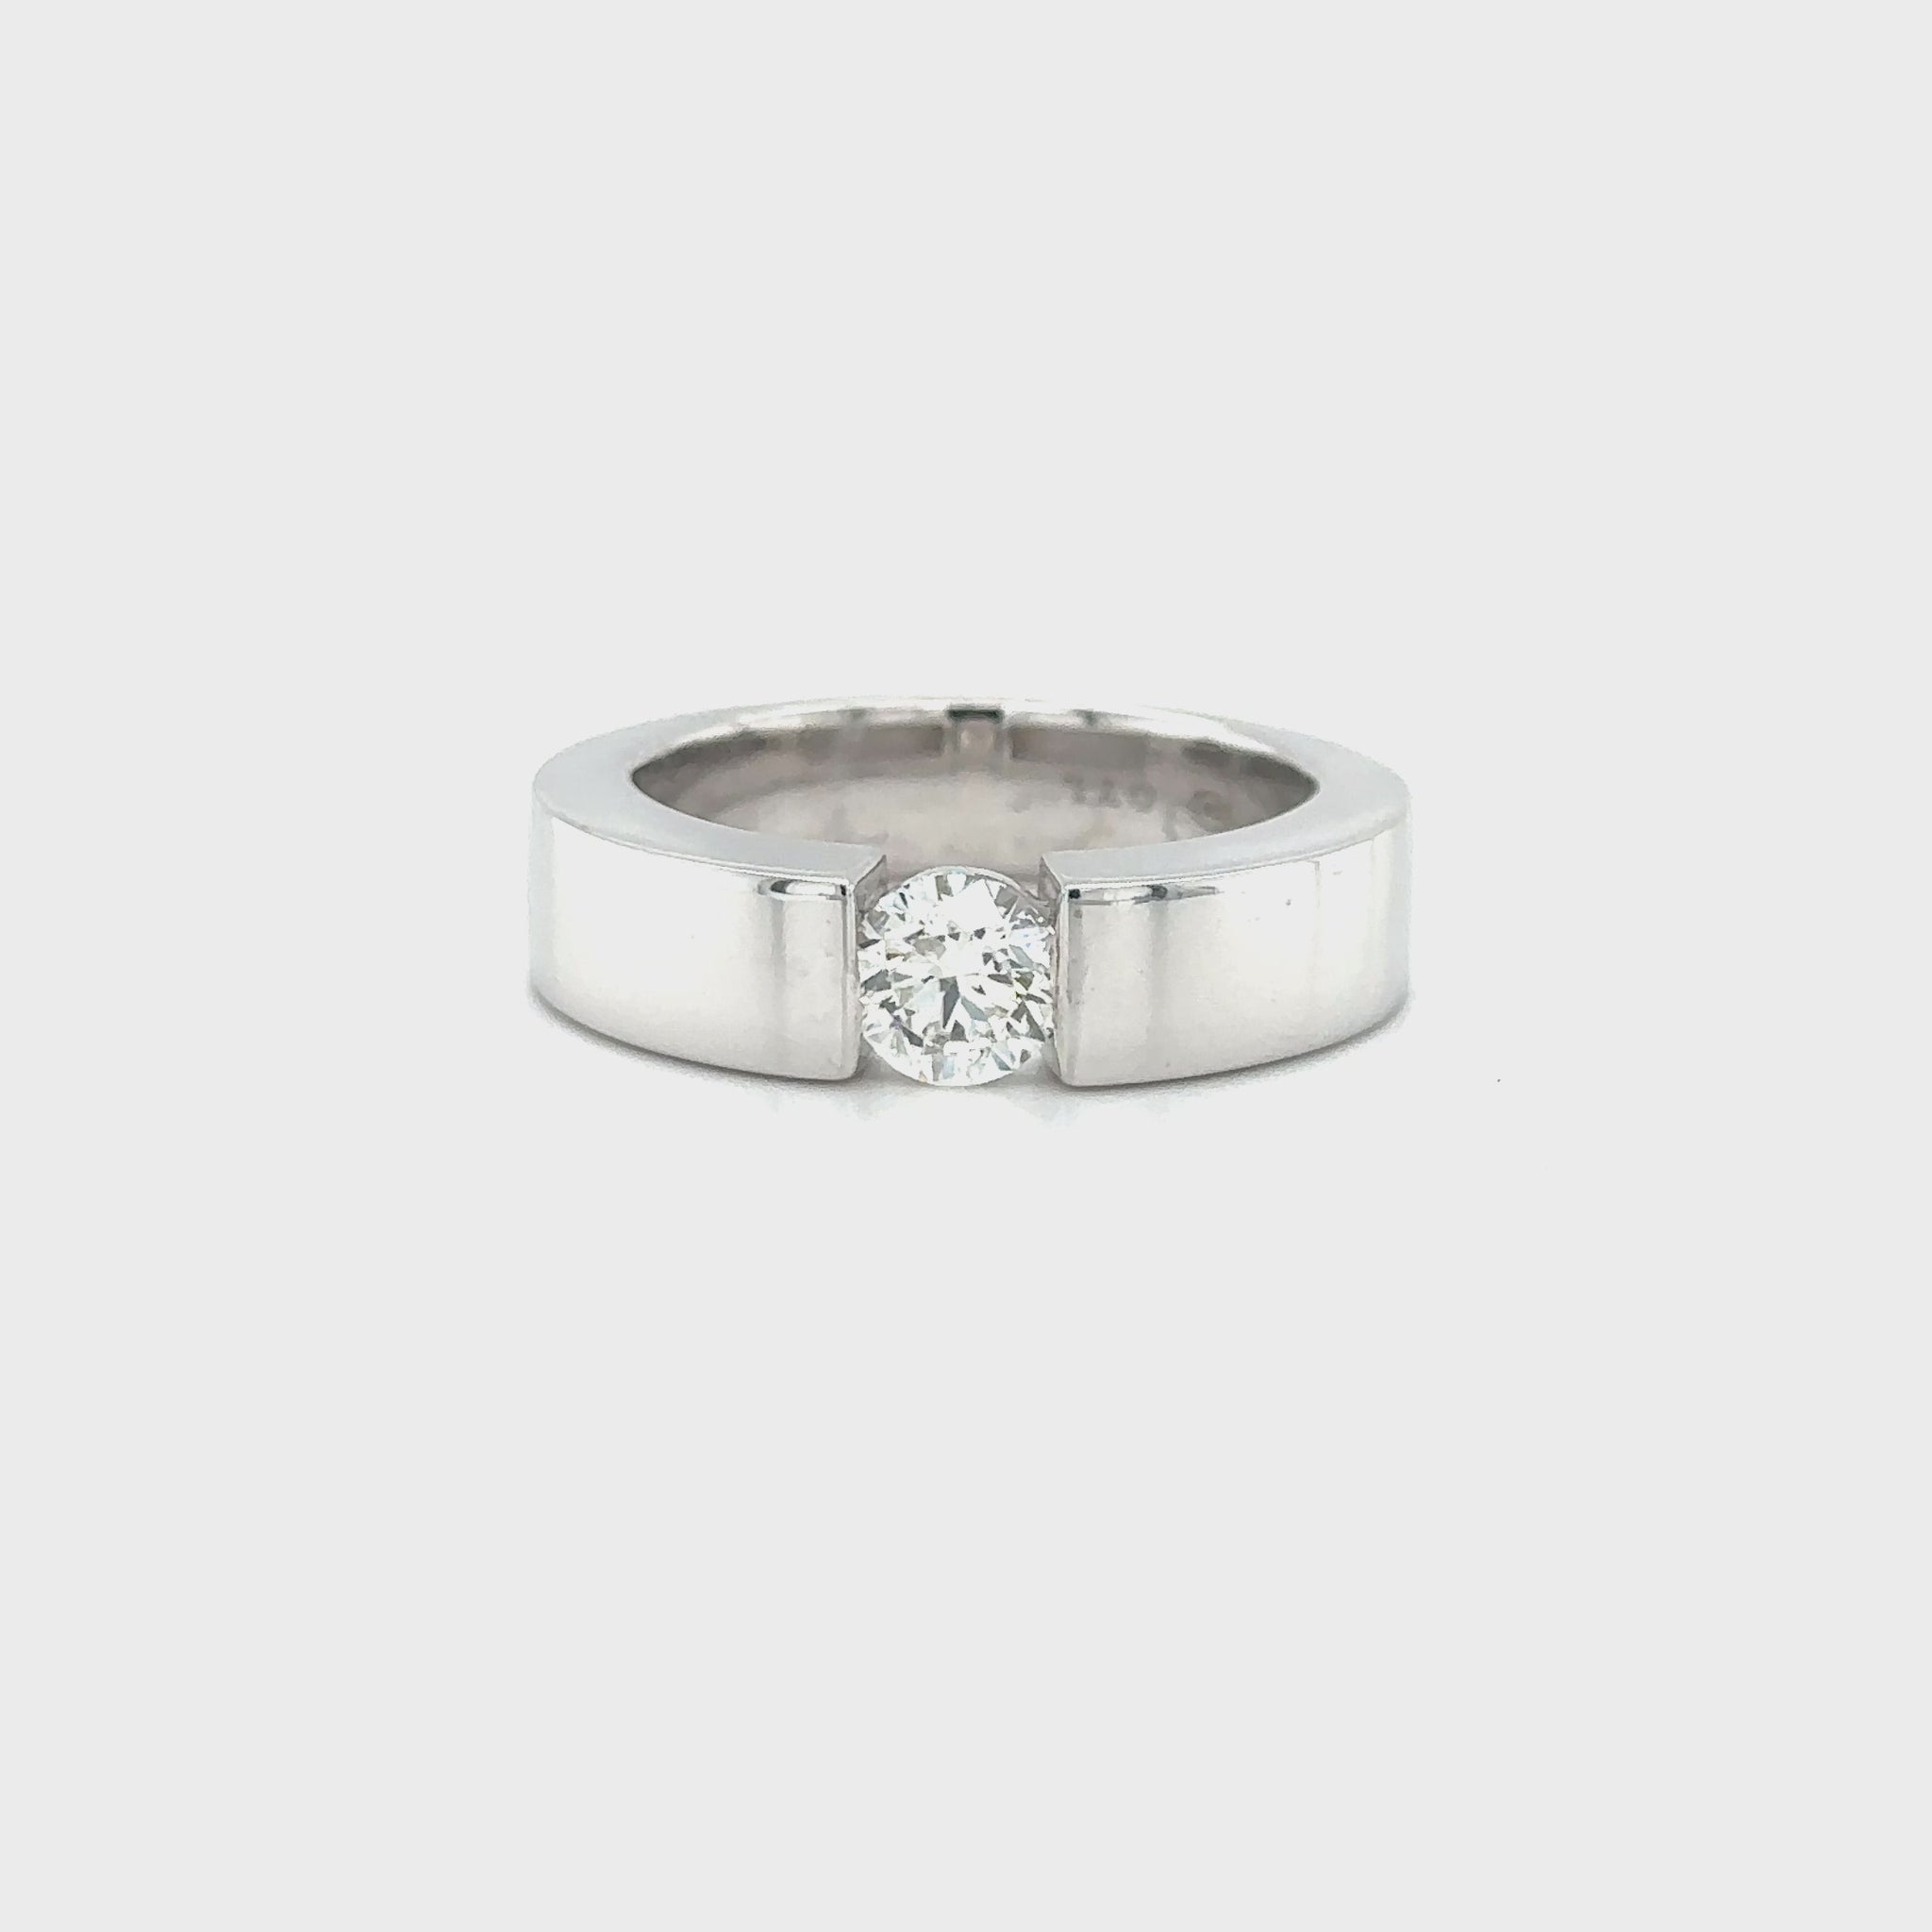 "White Gold Diamond Band," "Exquisite White Gold Diamond Wedding Band," "Luxurious Diamond Band in White Gold," "Elegant White Gold Diamond Ring," "Fine Jewelry White Gold Band with Diamonds," "High-Quality Diamond Wedding Band in White Gold," "Statement White Gold Diamond Band," "Sparkling Diamond Band in White Gold," "Beautiful White Gold Diamond Ring," "Fashionable Diamond Band in White Gold."